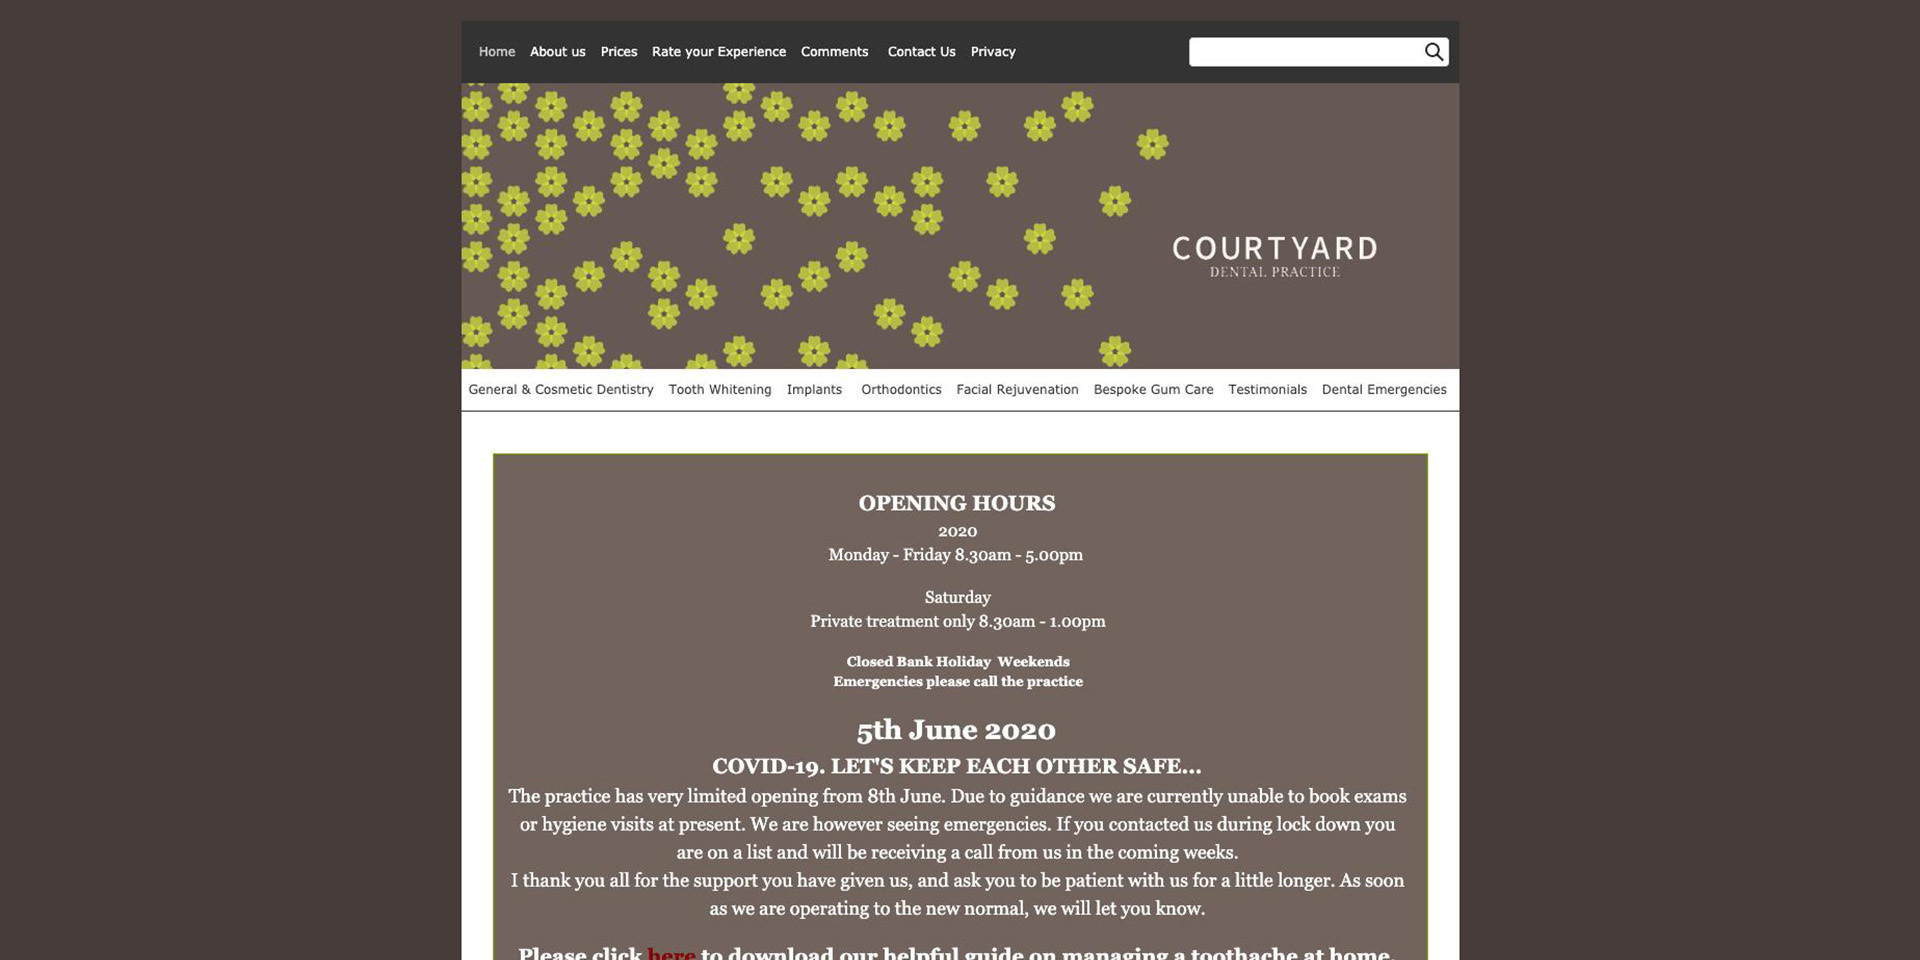 The old Courtyard website